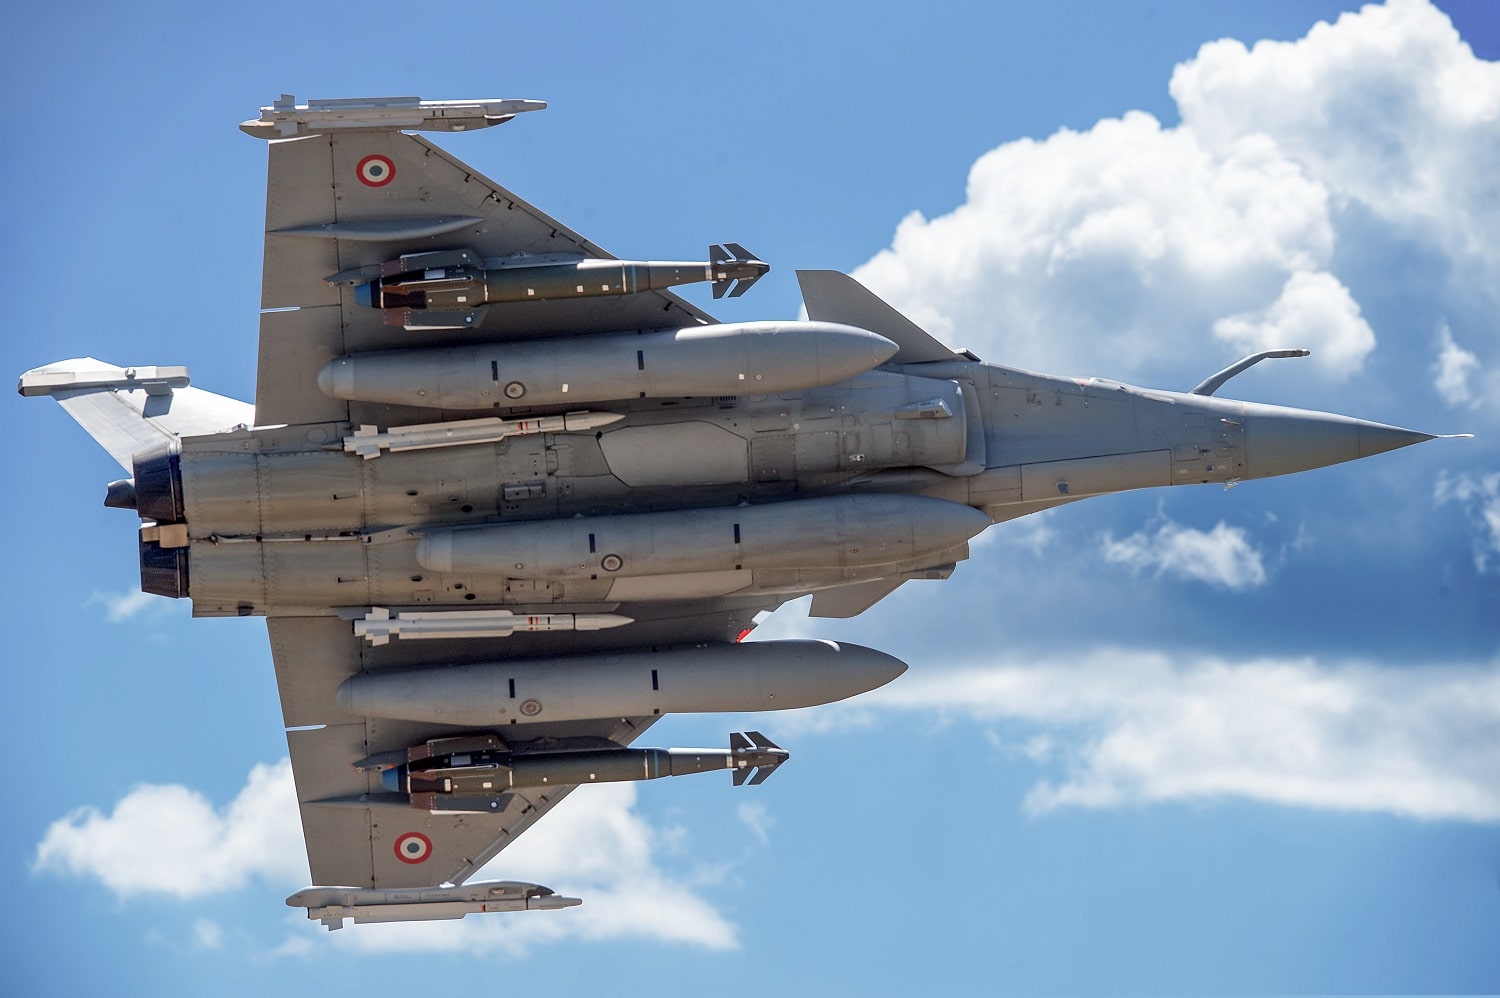 Why is there no two-seater Rafale variant for the naval version?